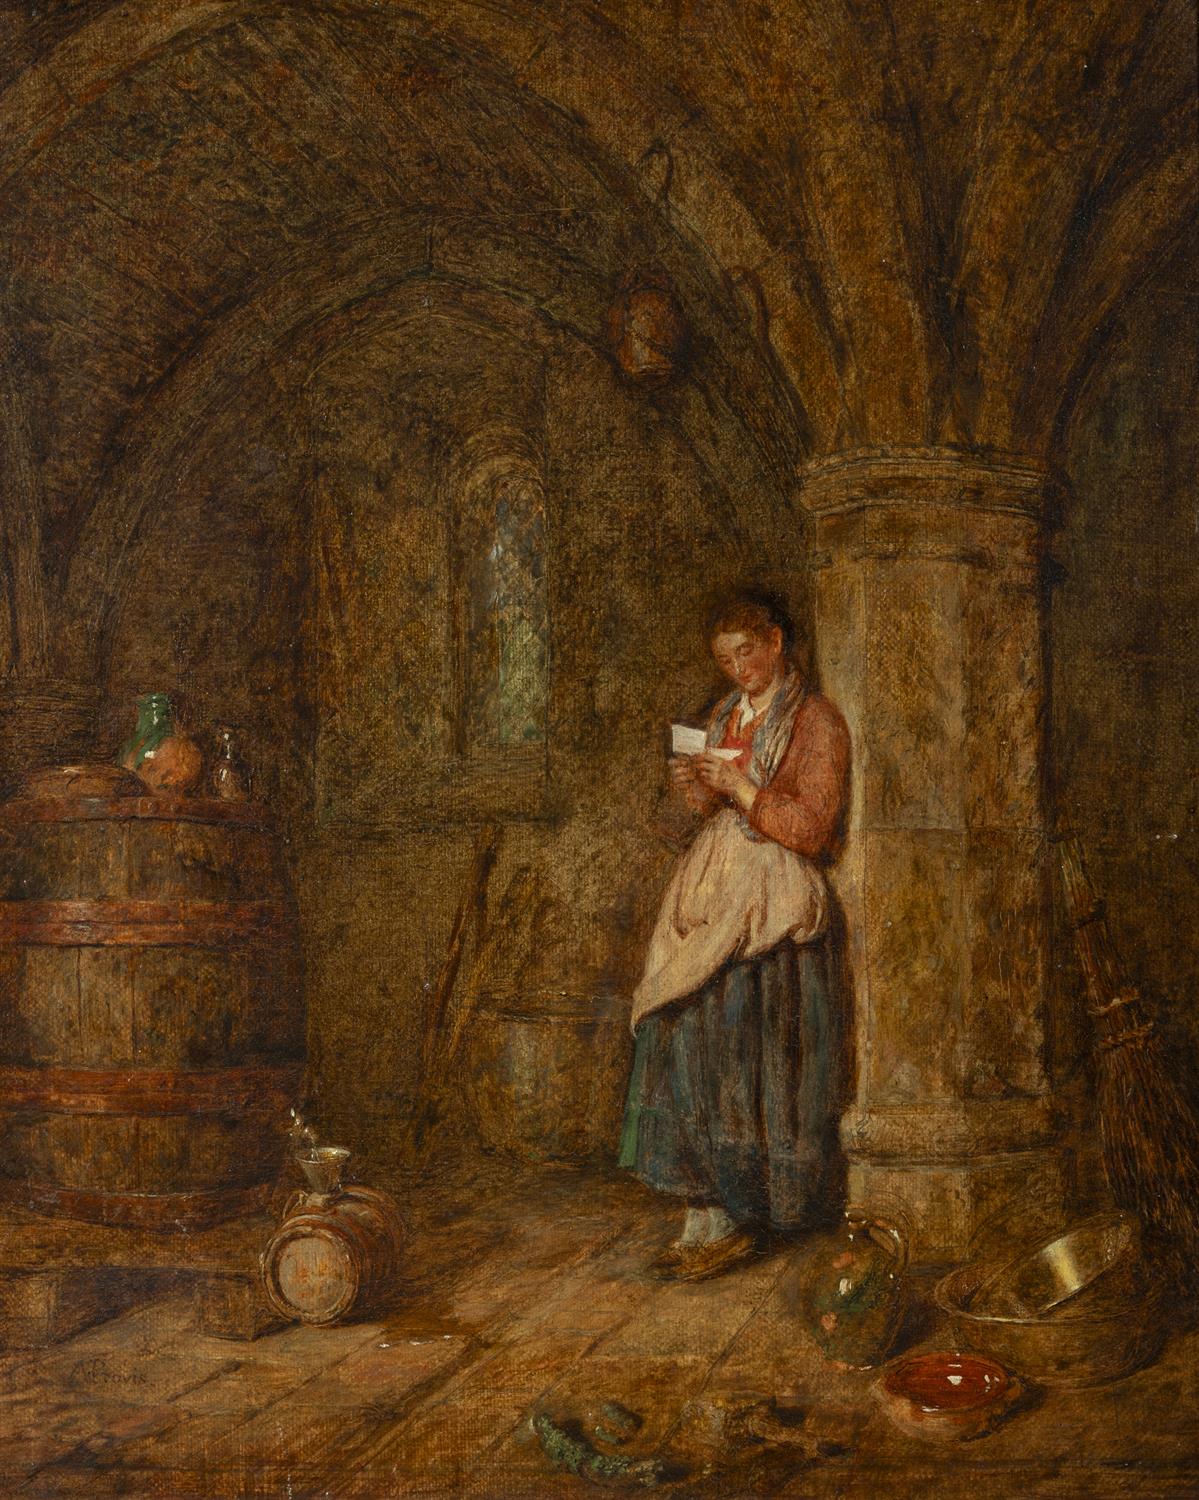 ALFRED PROVIS (1843-1886) ‘The Letter’ Oil on canvas 33.5x 28 cm Signed lower left - Image 2 of 4